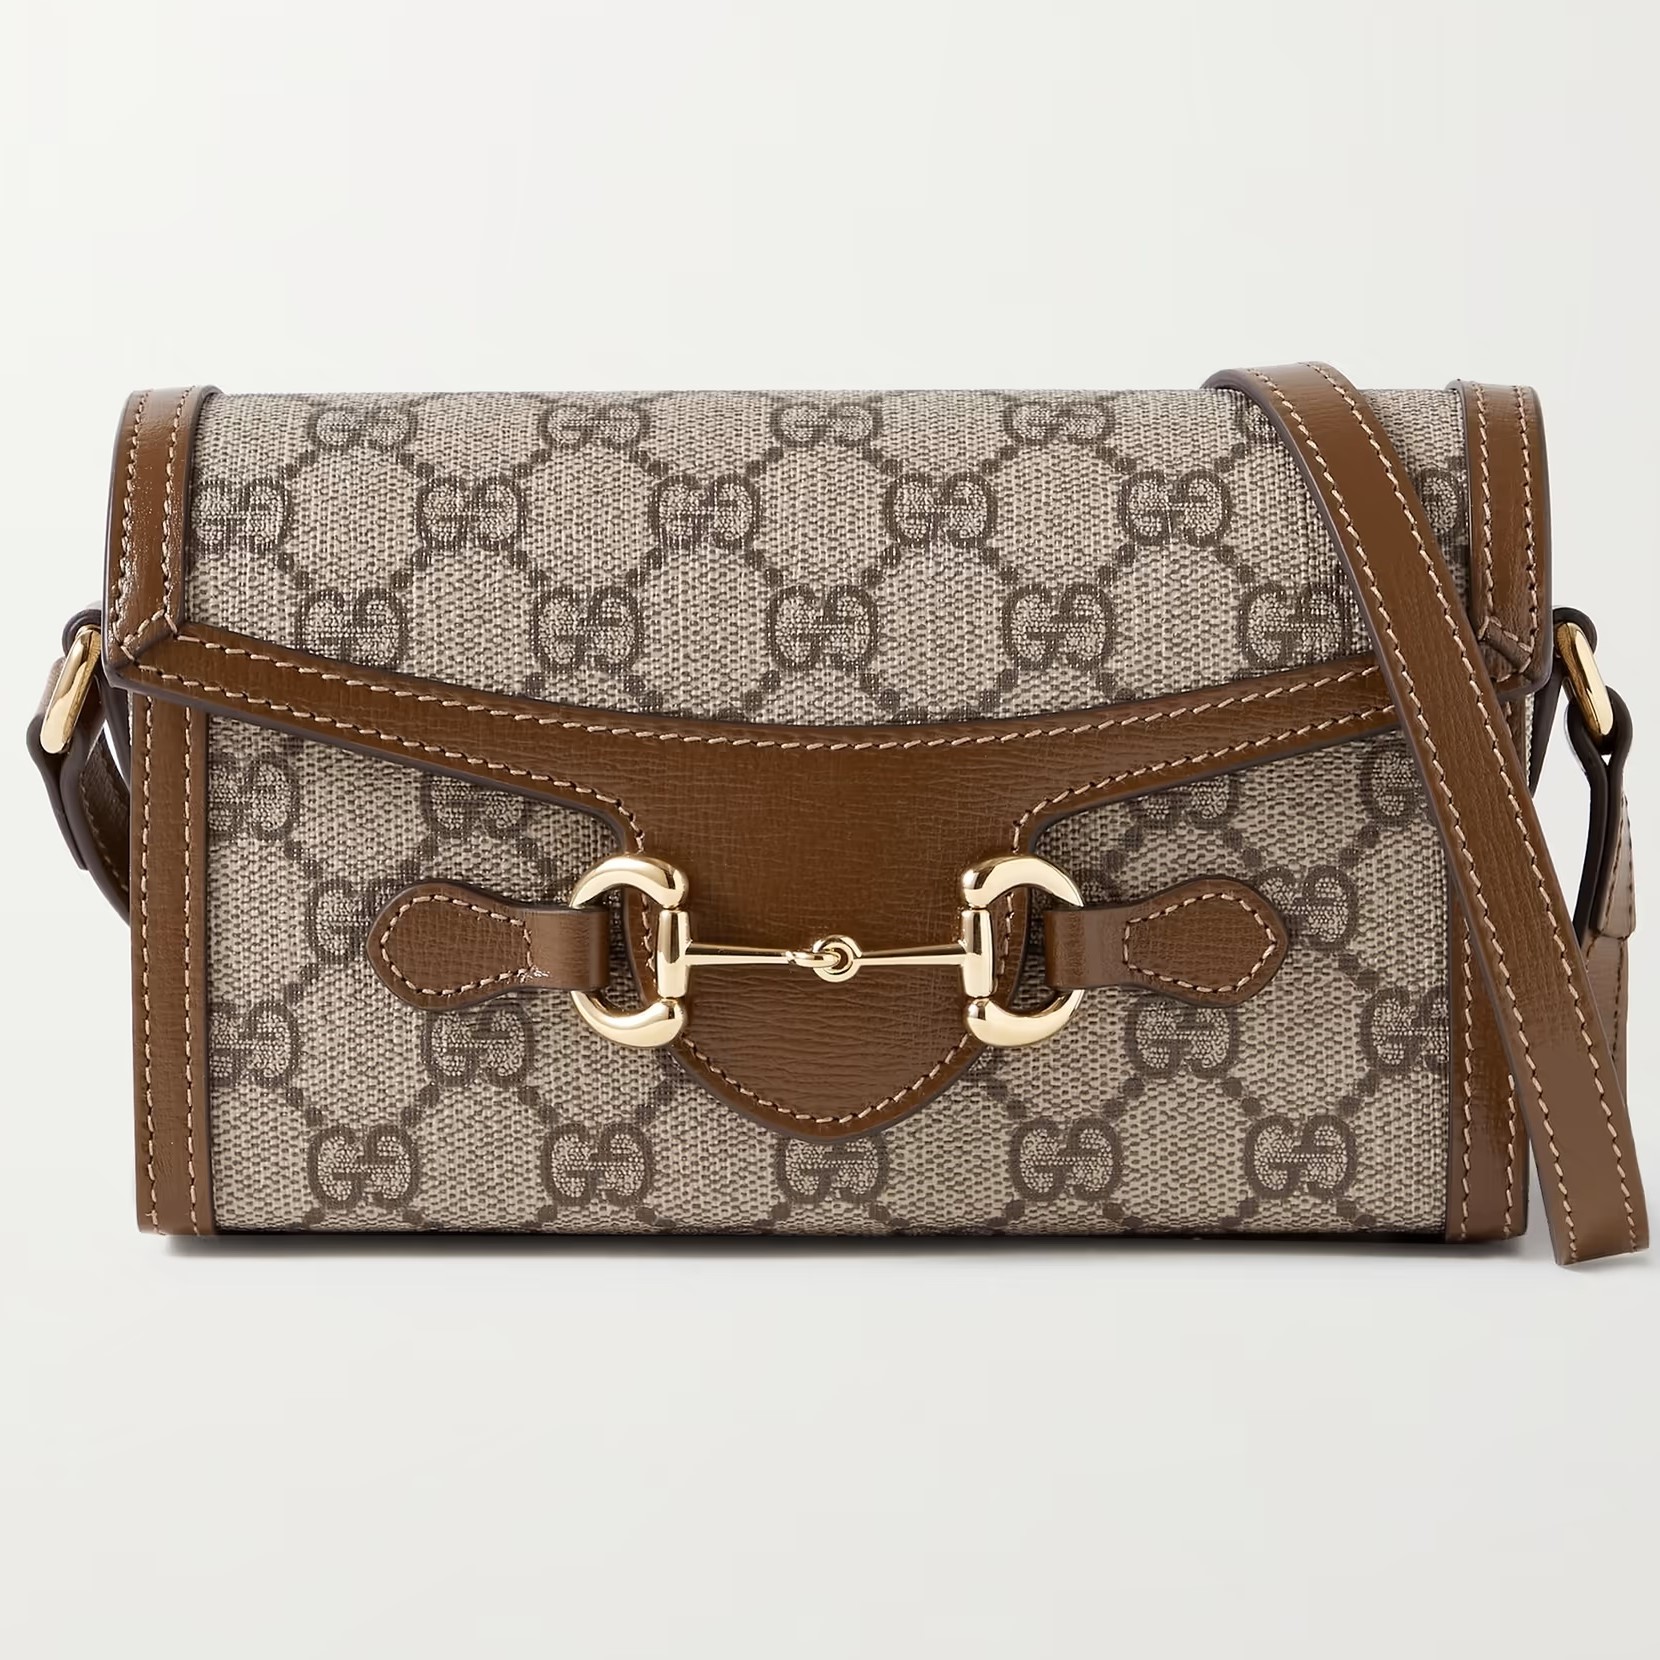 TÚI ĐEO CHÉO NỮ GUCCI HORSEBIT 1955 BROWN LEATHER TRIMMED PRINTED COATED CANVAS SHOULDER BAG 3